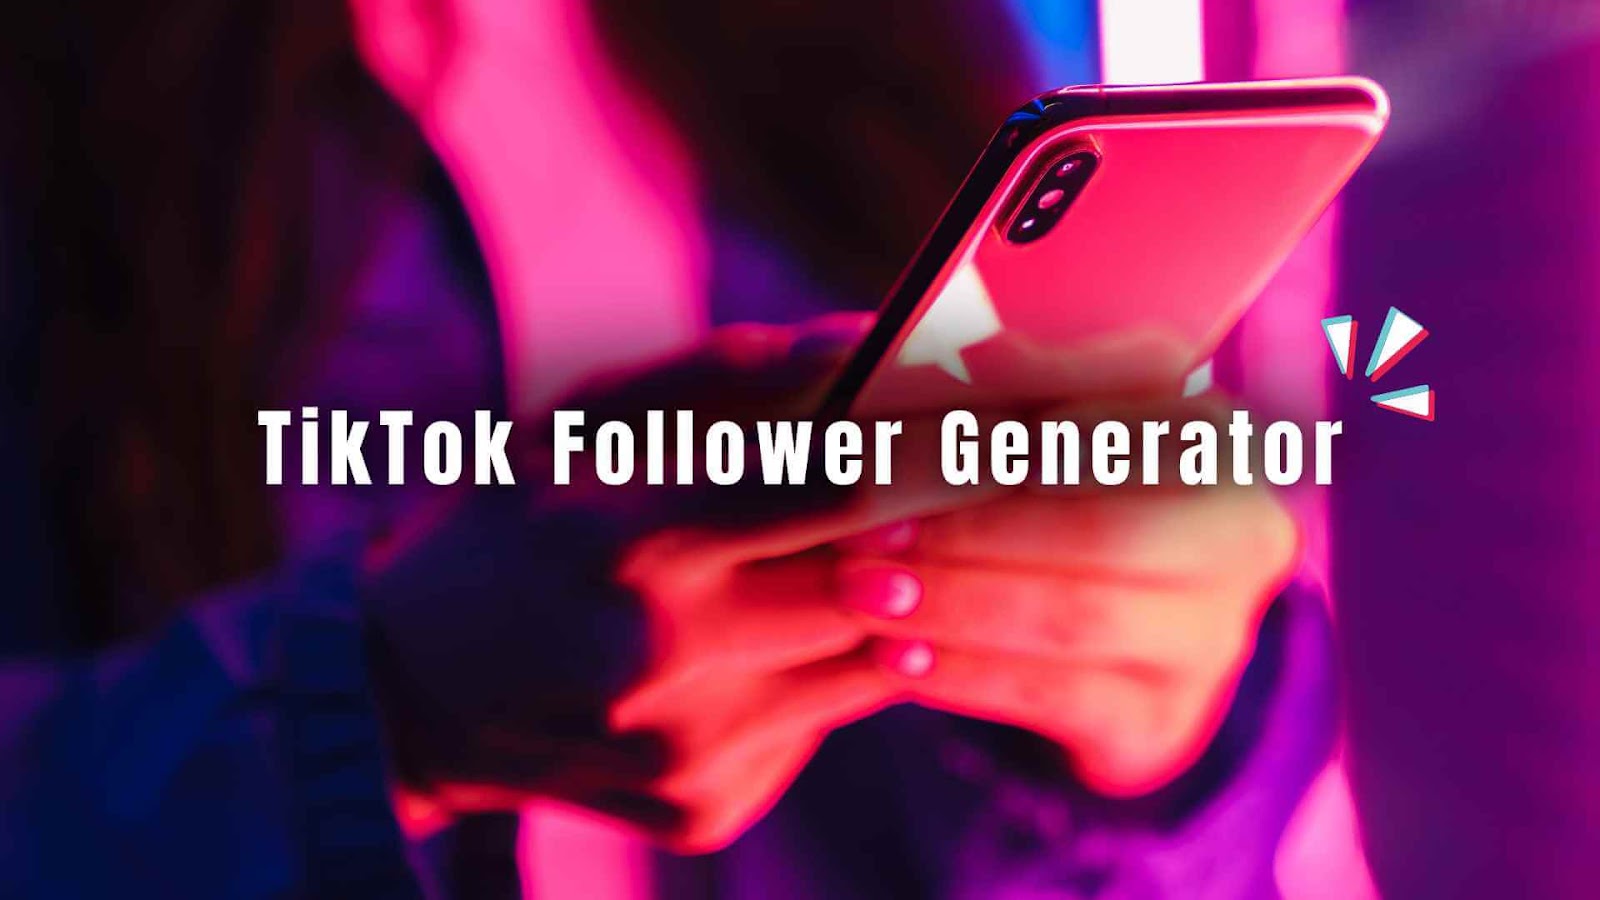 A hand holding a smartphone with the text "TikTok Follower Generator" background.